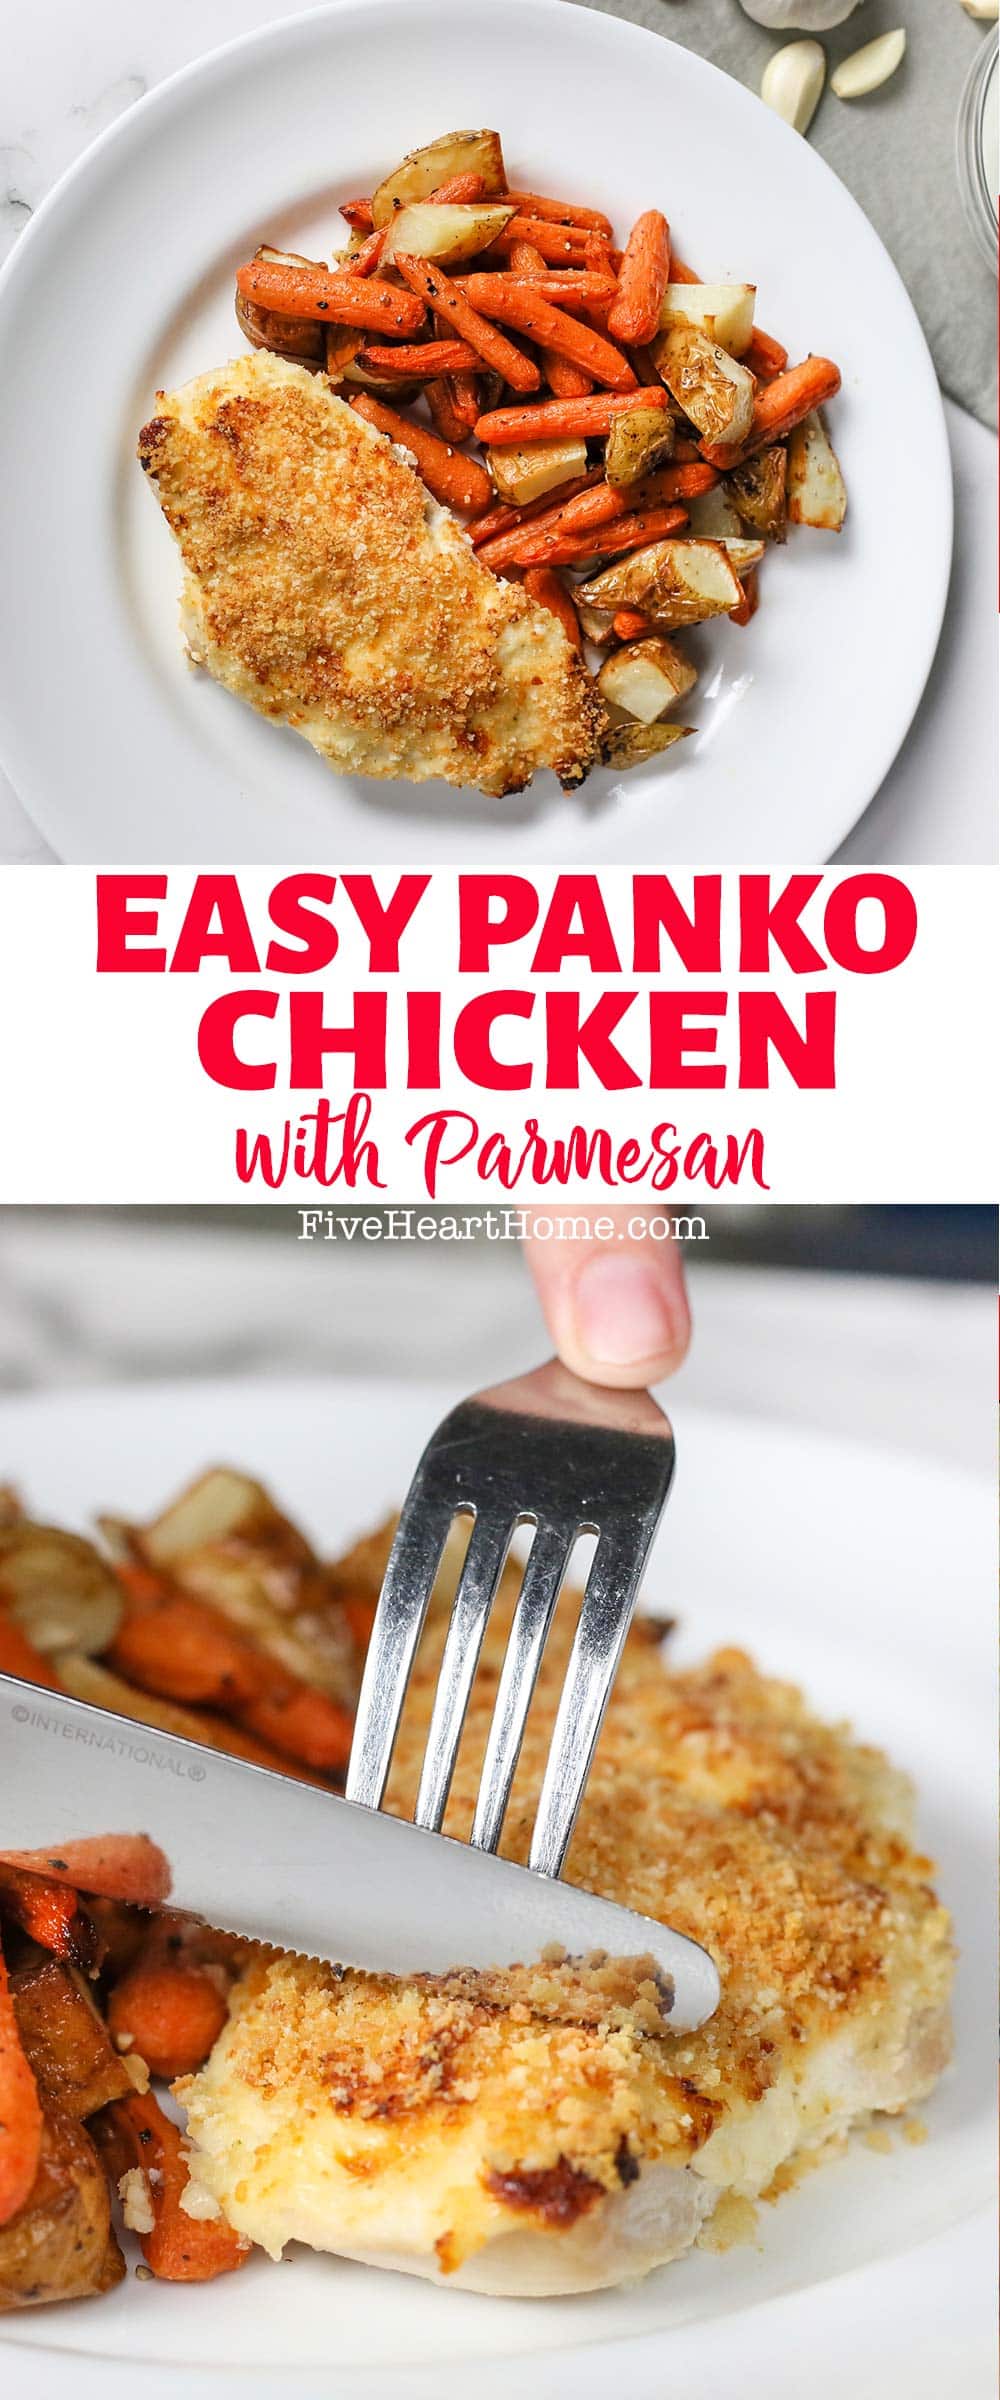 Panko Chicken ~ this winner of a dinner recipe features chicken breasts flavored with Parmesan and baked until tender and juicy on the inside and crispy on the outside...everyone loves this Panko crusted chicken! | FiveHeartHome.com via @fivehearthome